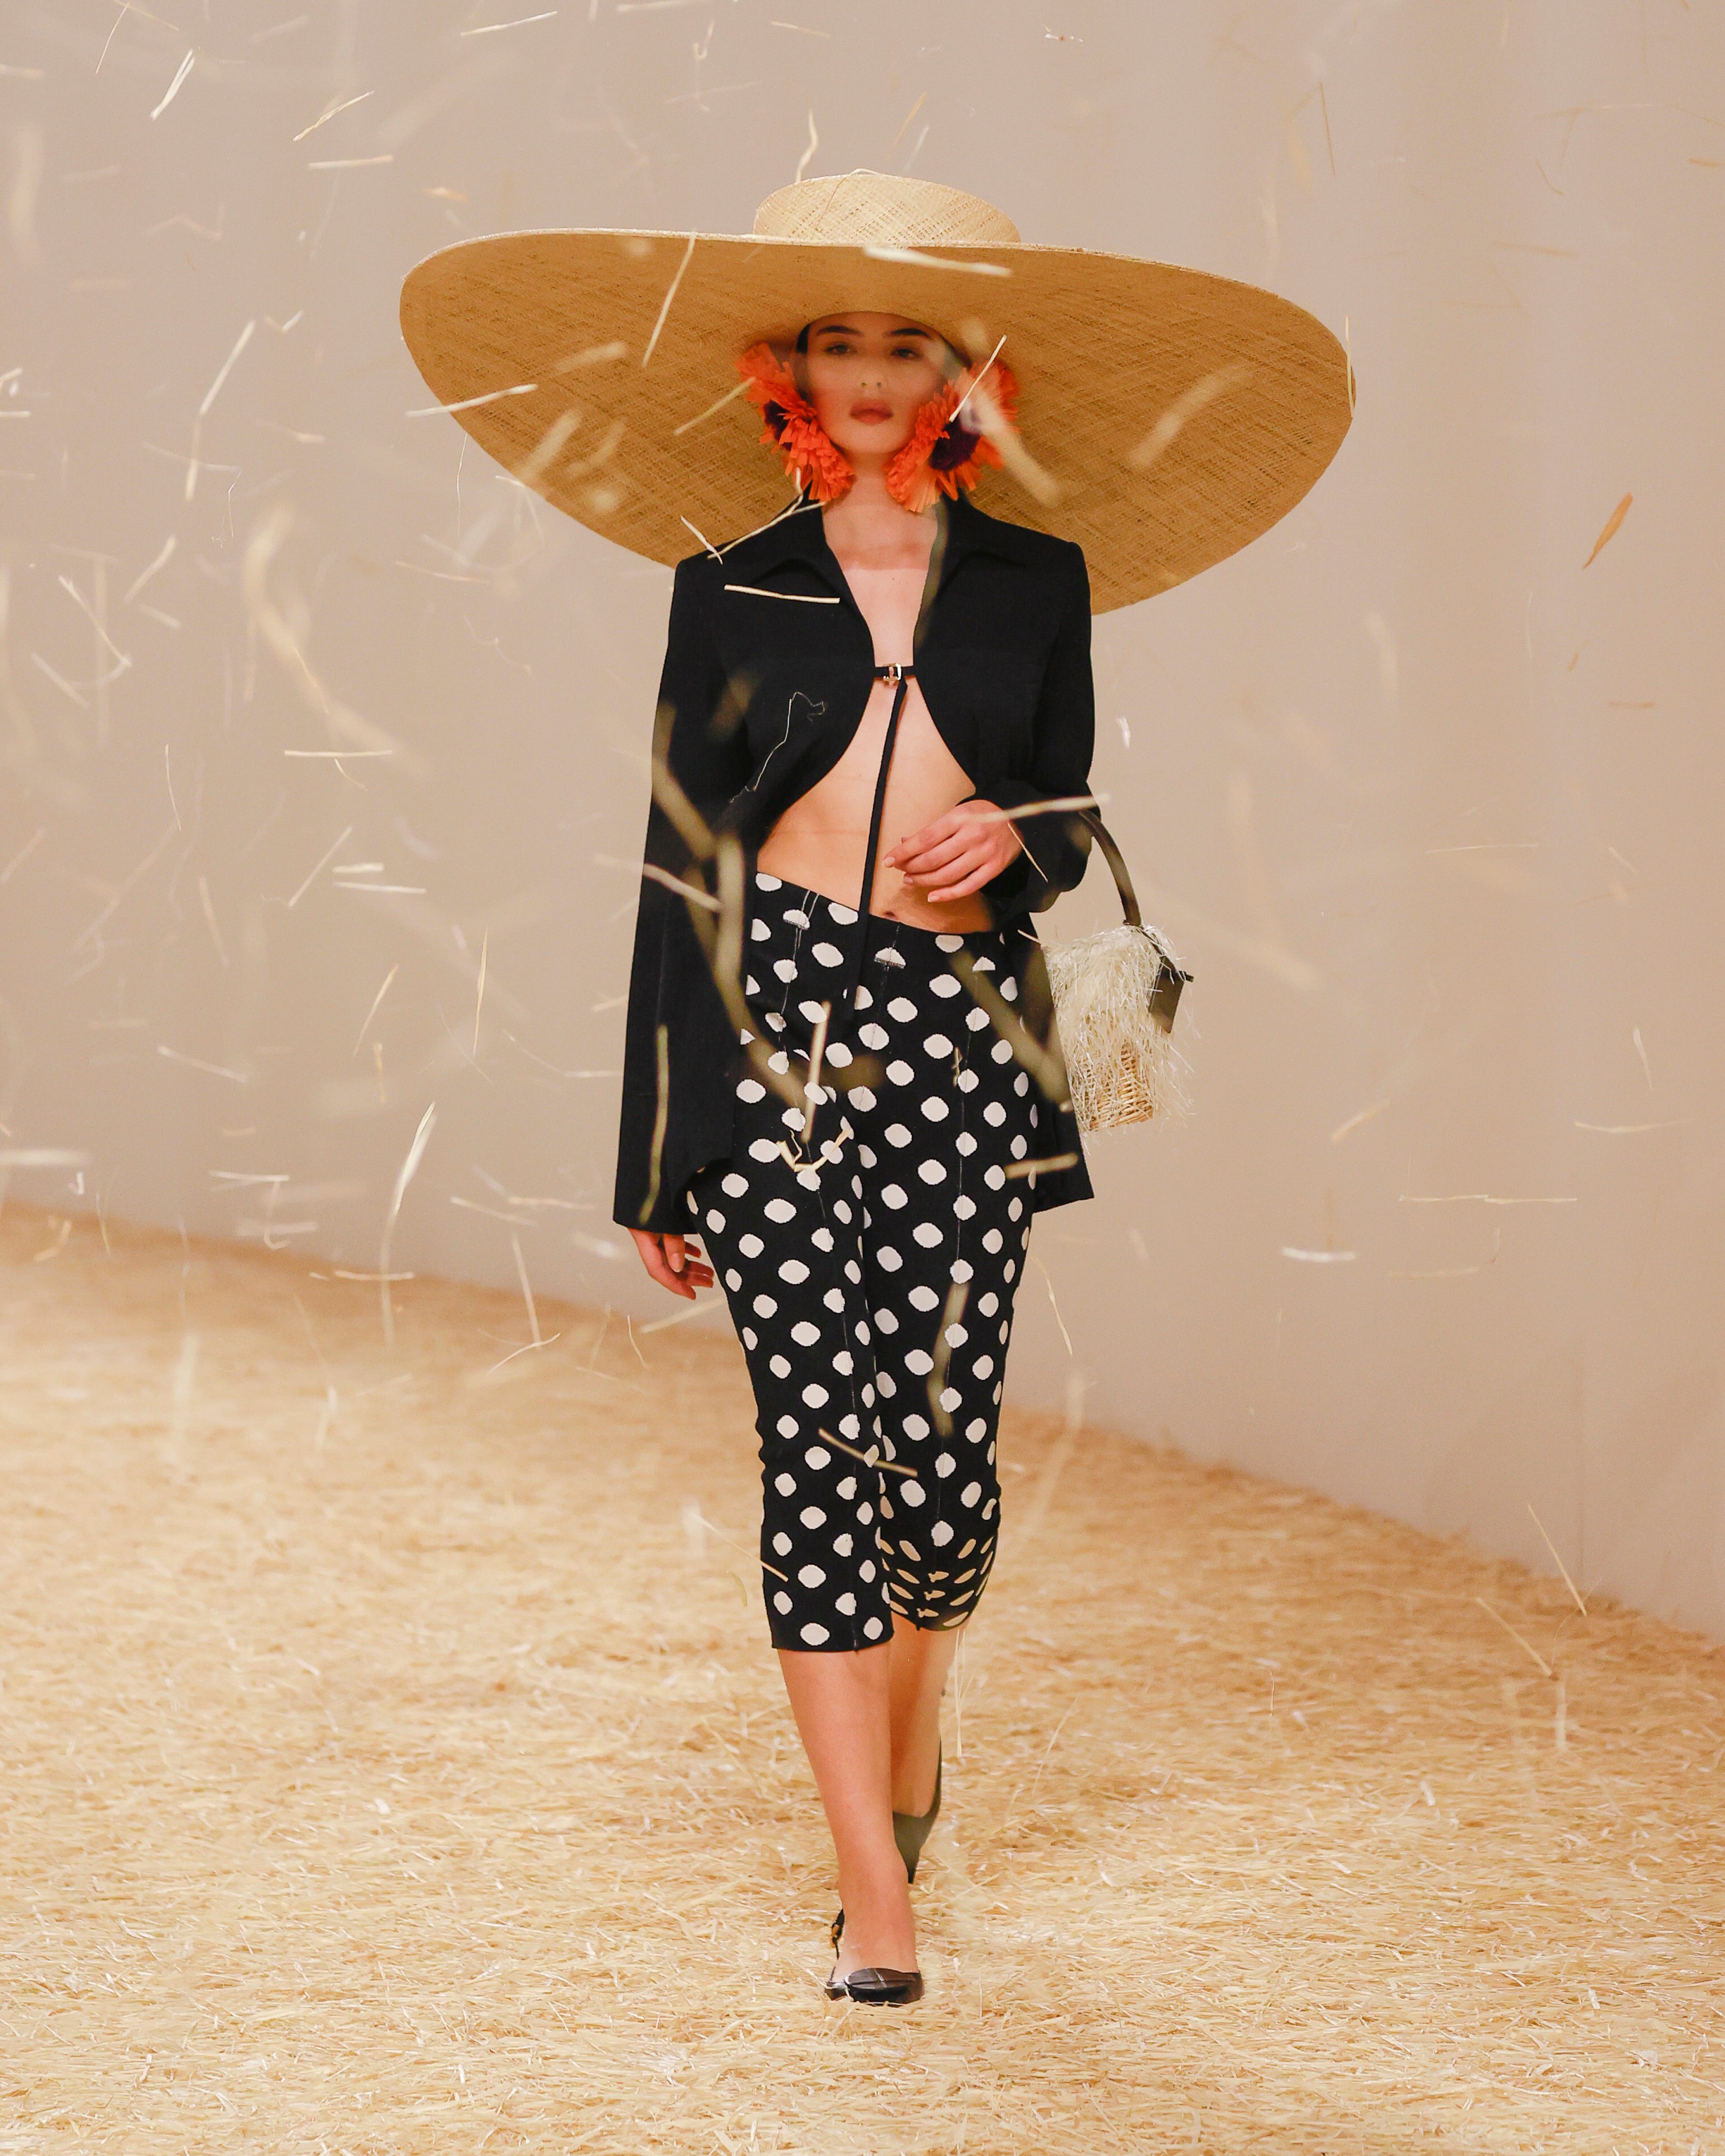 Jacquemus’ recent spring 2023 show in Le Bourget, Paris focused on getting ready for the holidays and you can too with pieces from with Alexander McQueen and Gucci. Photo: Jacquemus